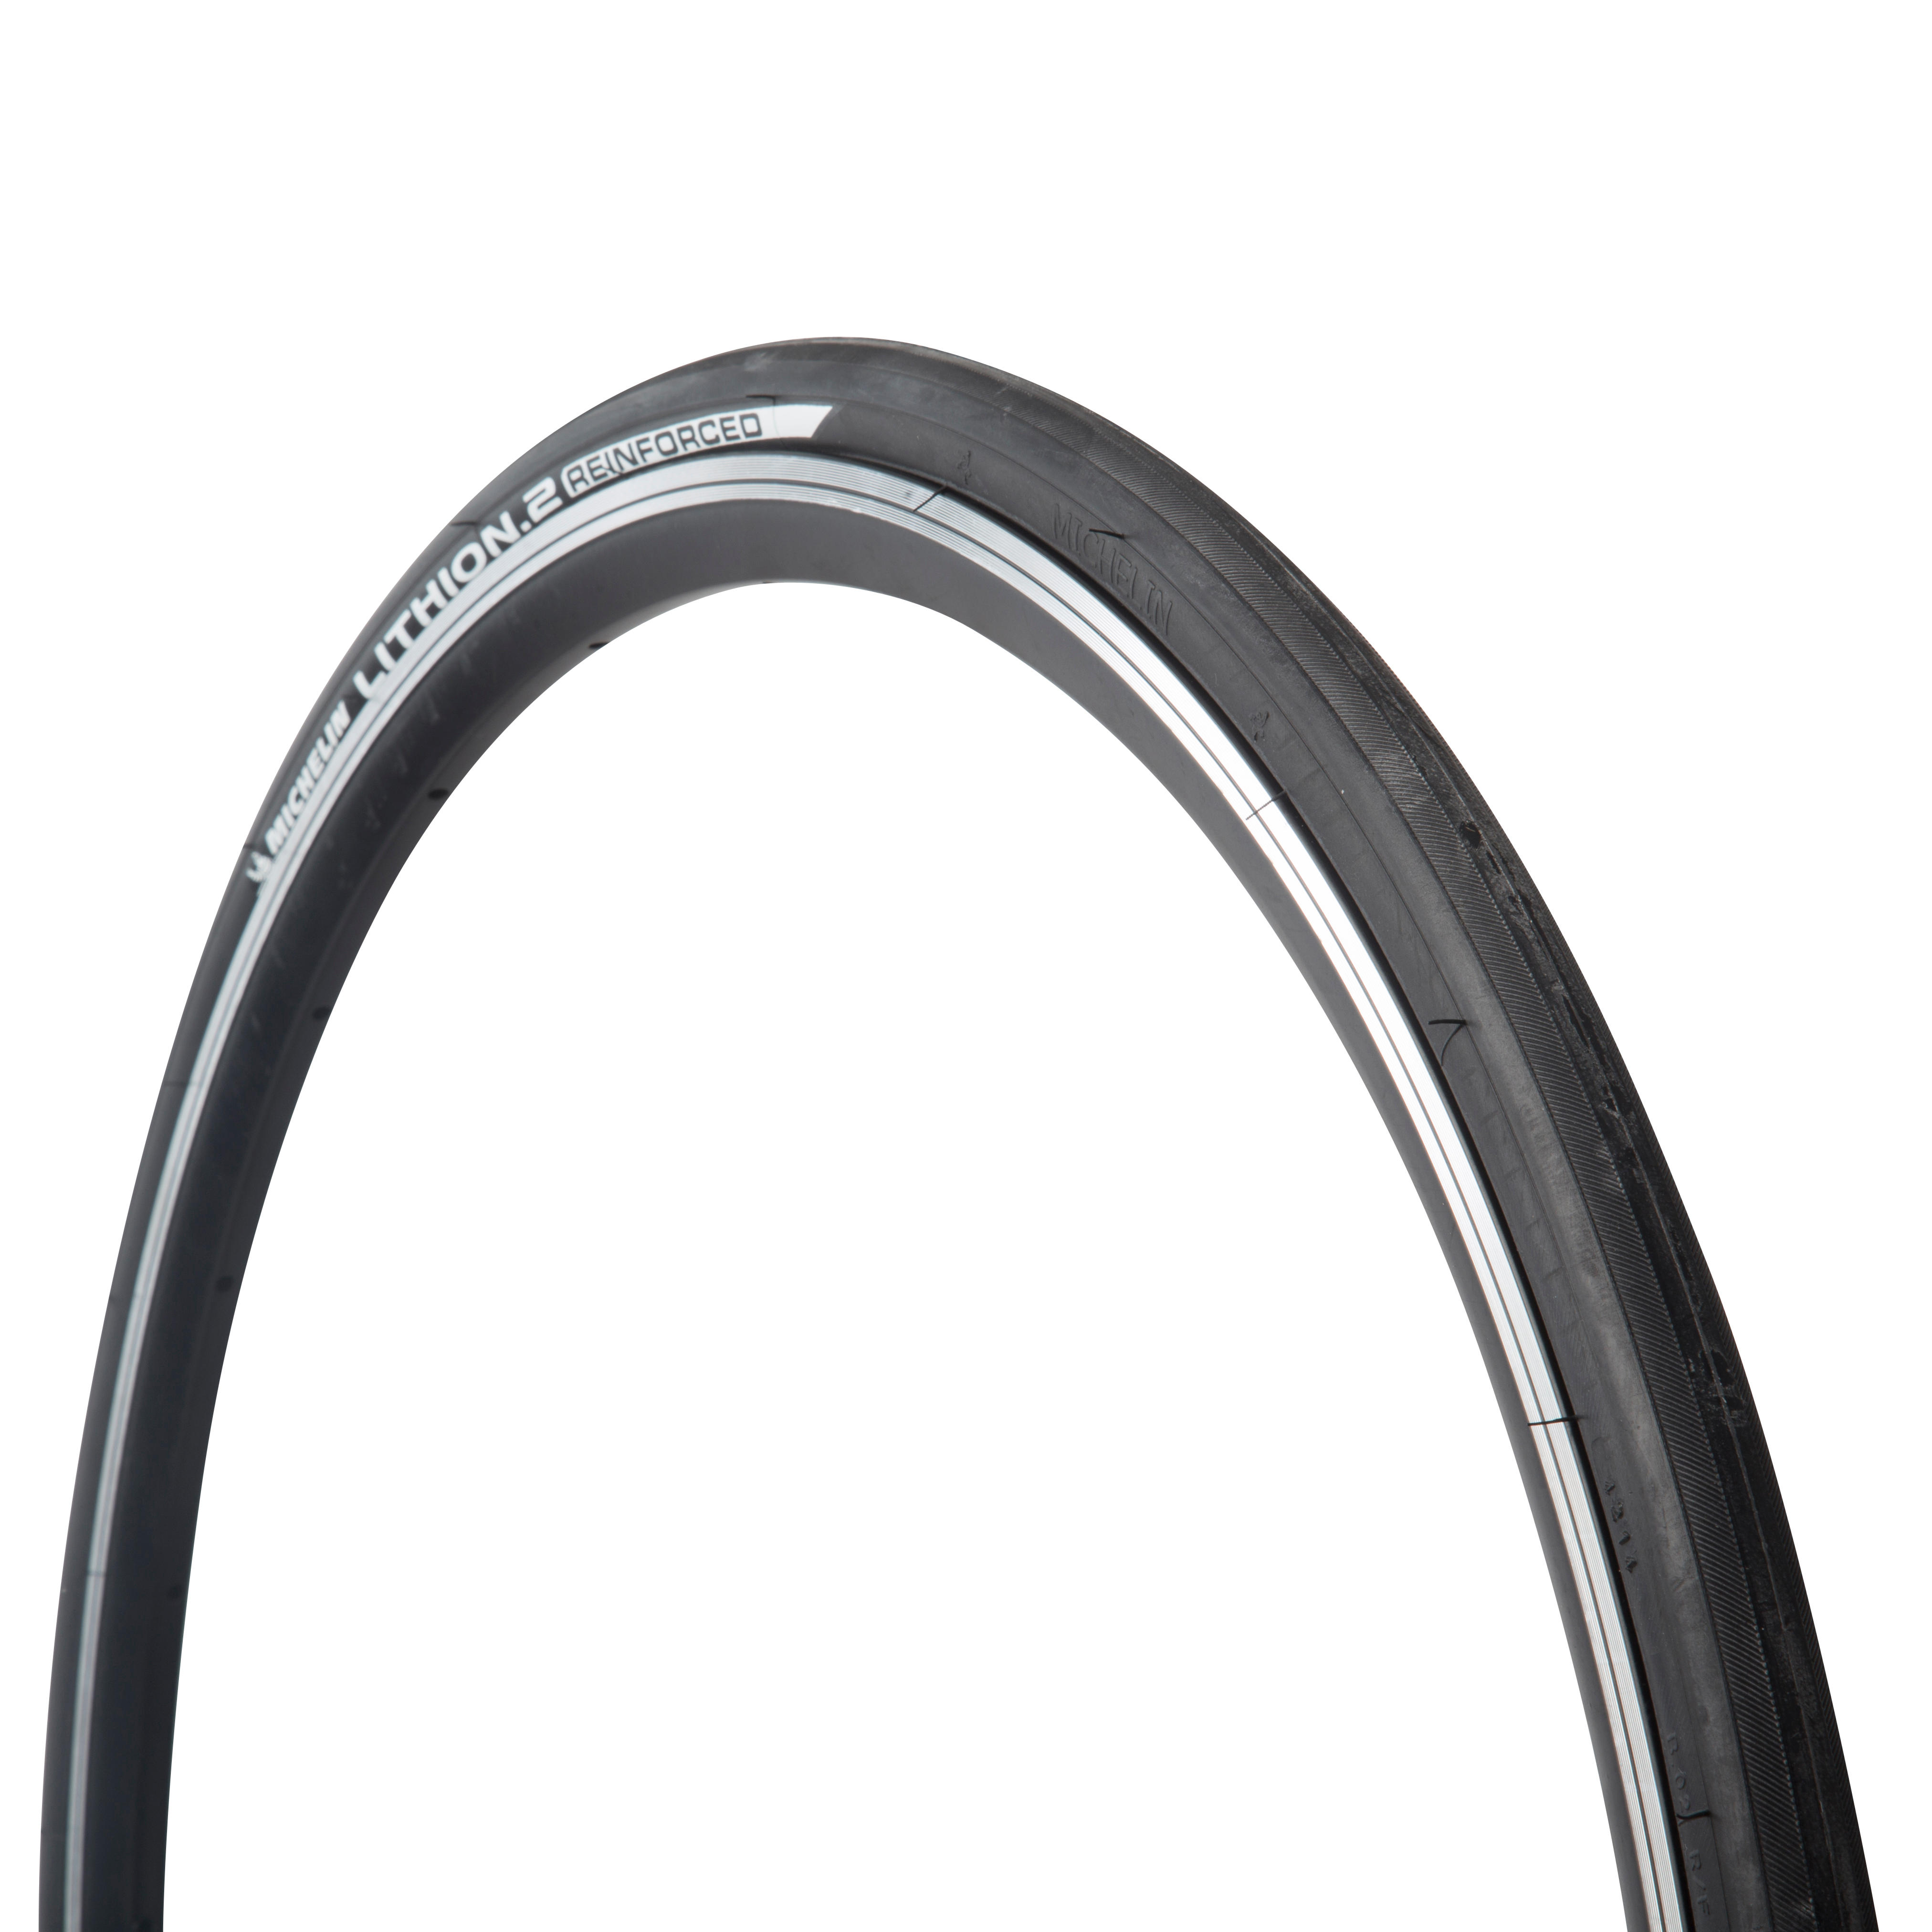 Michelin Buitenband Racefiets Lithion Reinforced 700x25 Vouwband / ETRTO 25-622